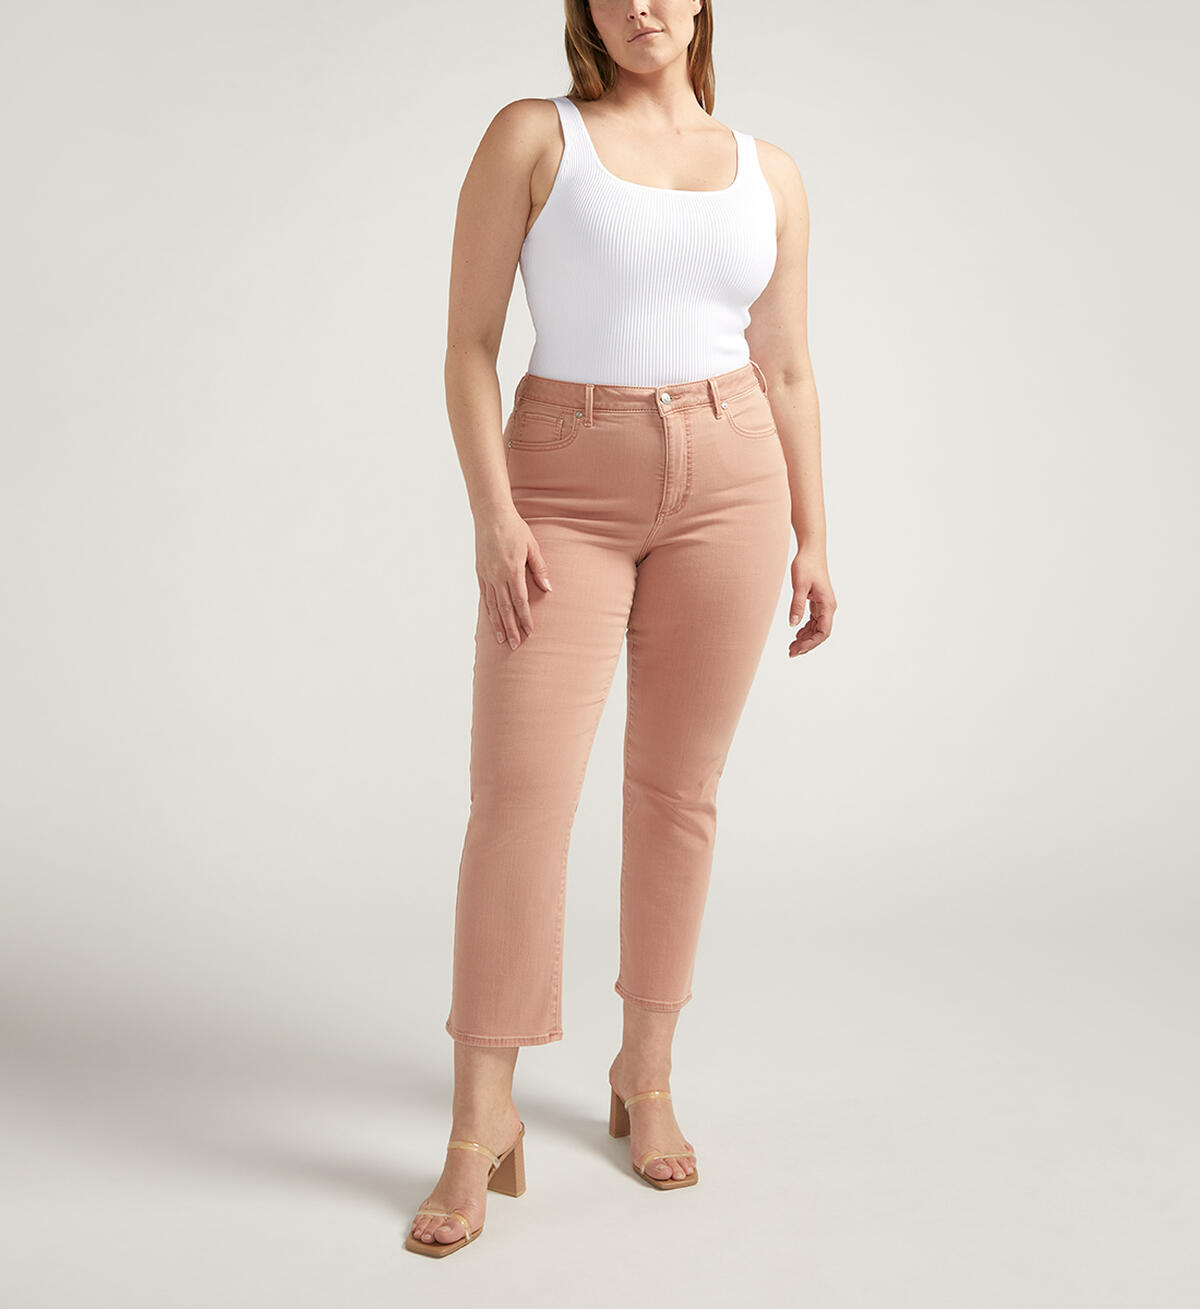 Isbister High Rise Straight Leg Jeans Plus Size, Dusty Coral, hi-res image number 0